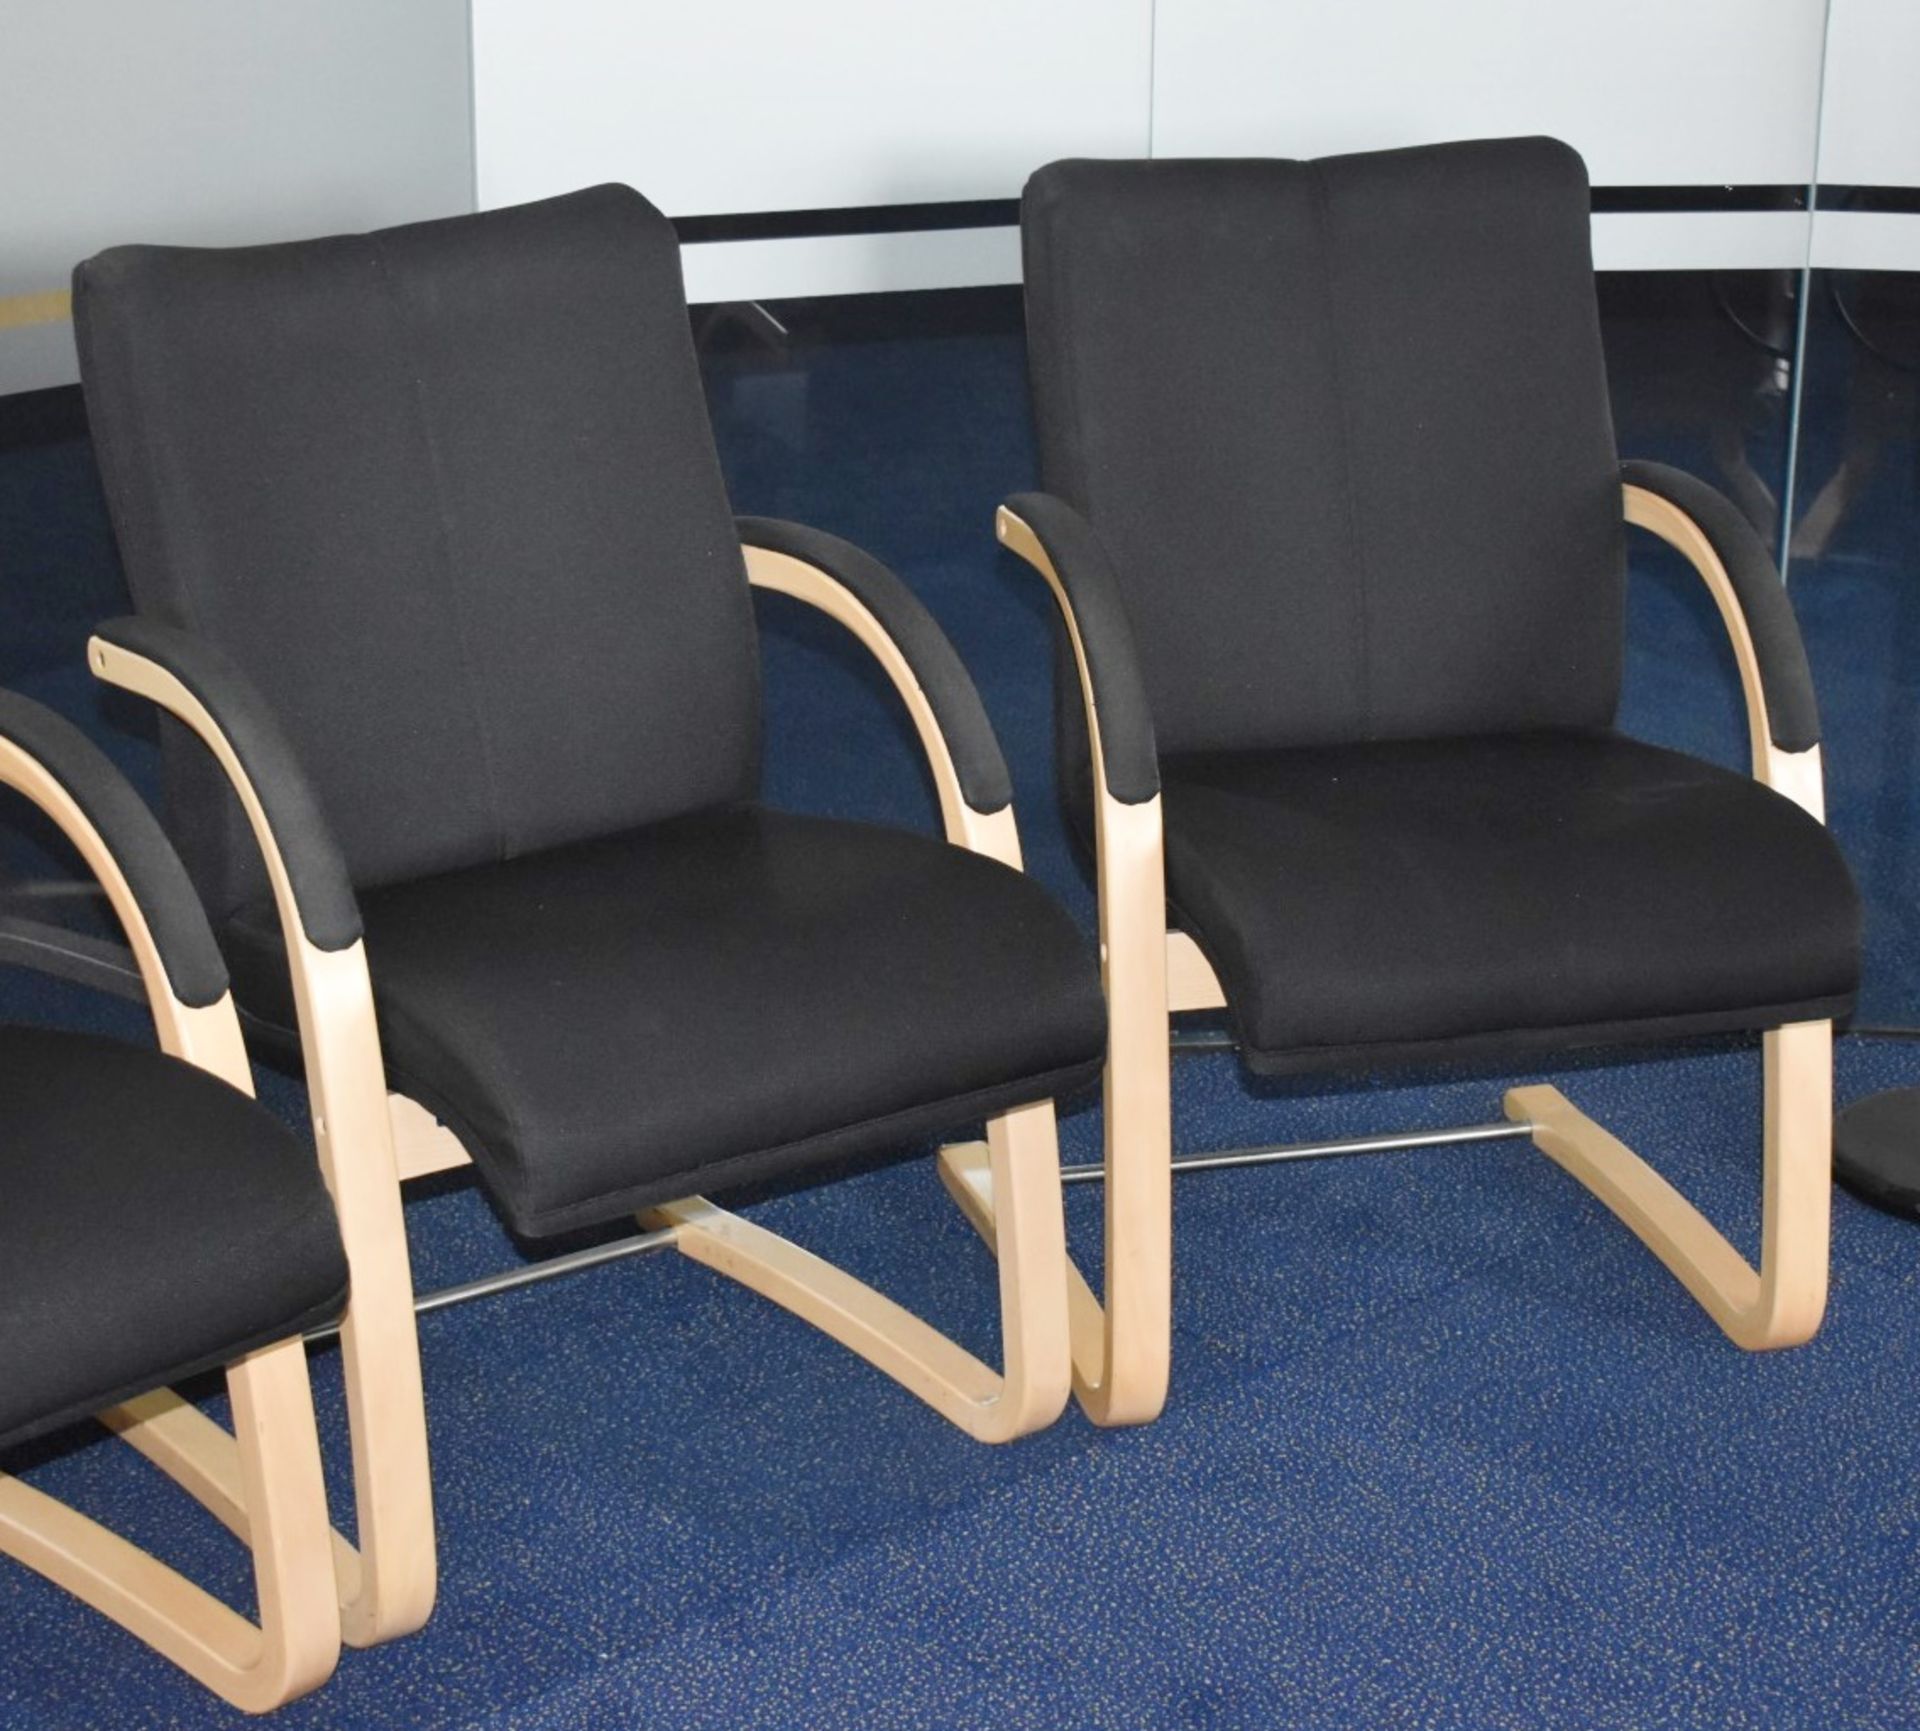 4 x Cantilever Office Meeting Chairs With Bentwood Frames and Black Fabric Seats -Â Manufactured - Image 3 of 7